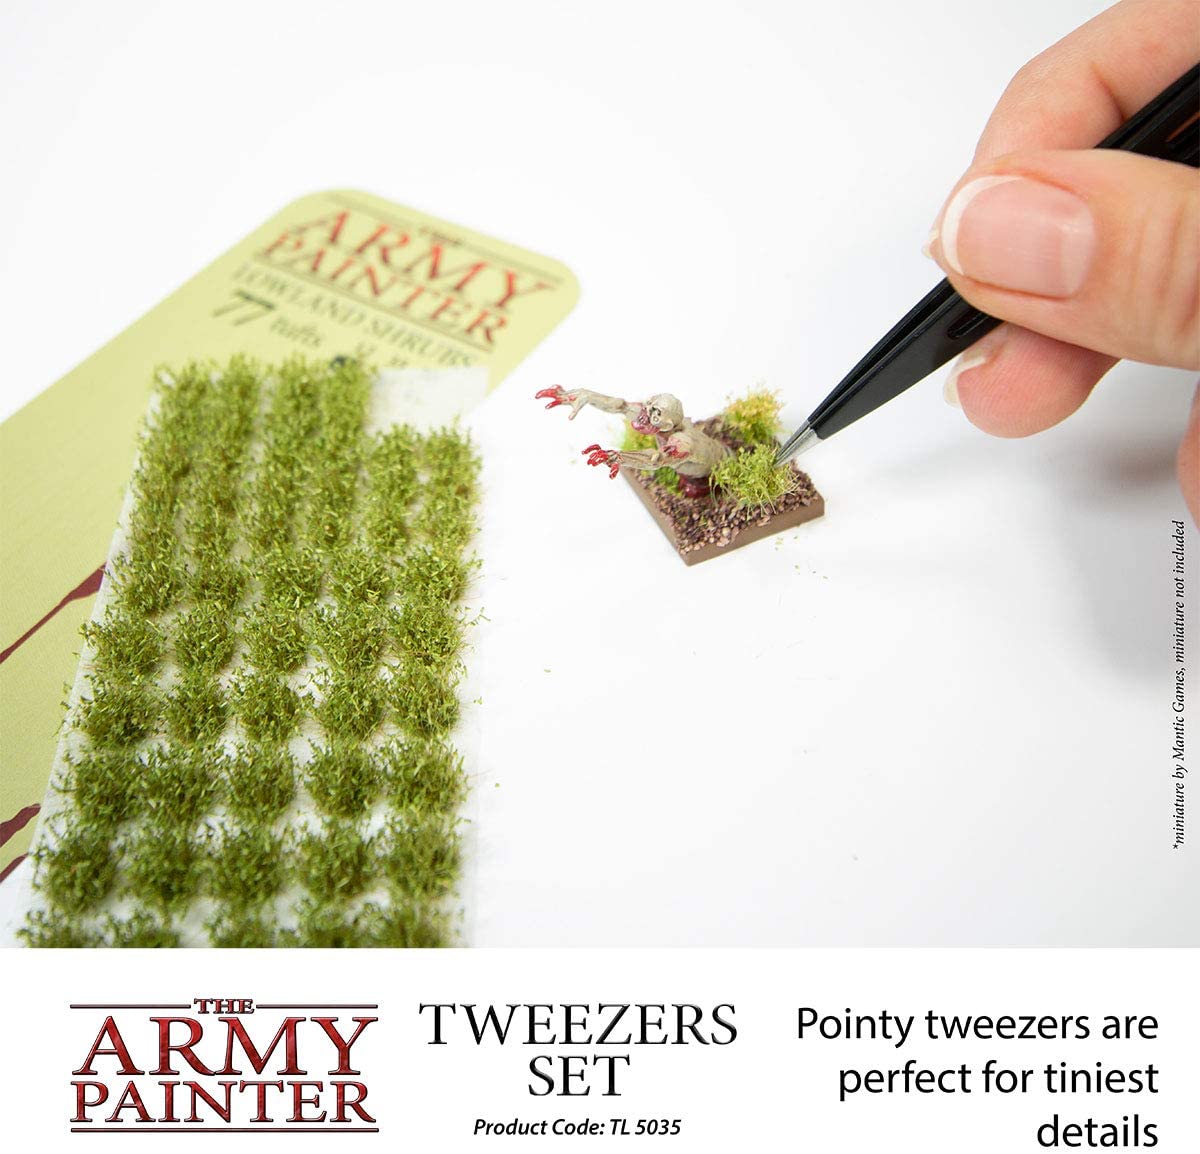 The Army Painter - Precision Tweezers (Set of 2)